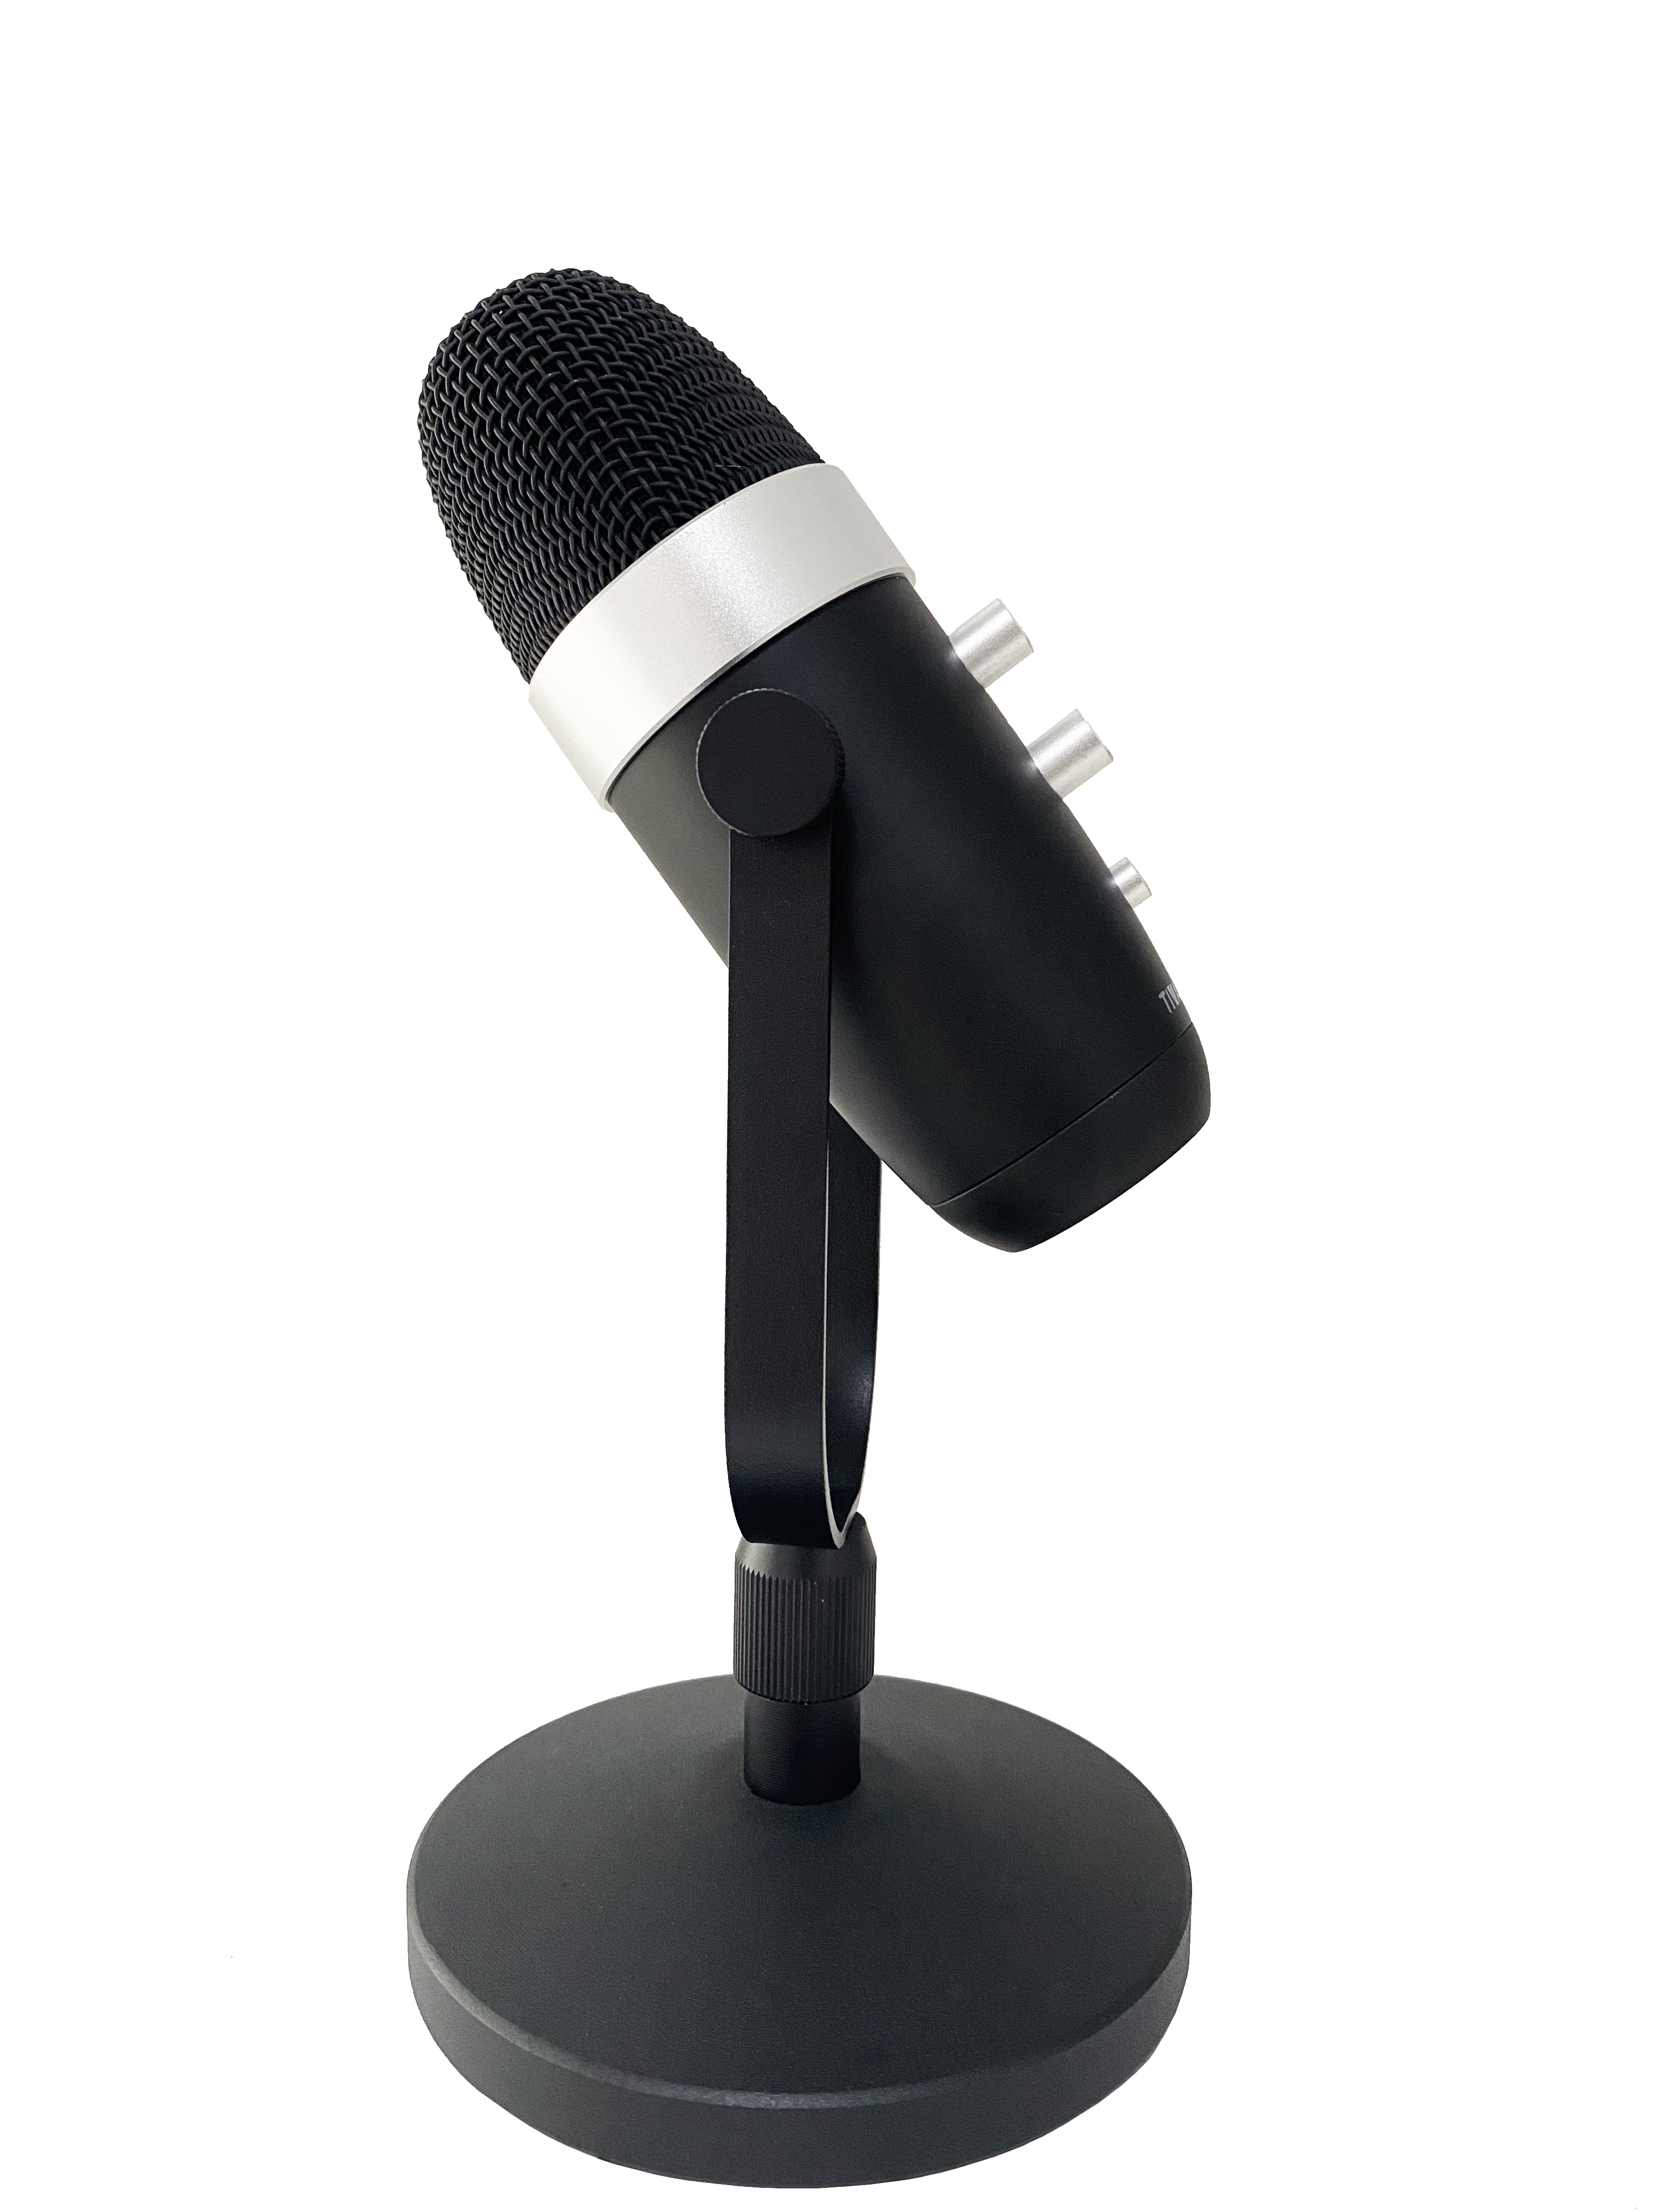 M7 Large Capsule Condenser Microphone With Build in Sound Card Come With USB Cable Connect With Computer/Smartphone